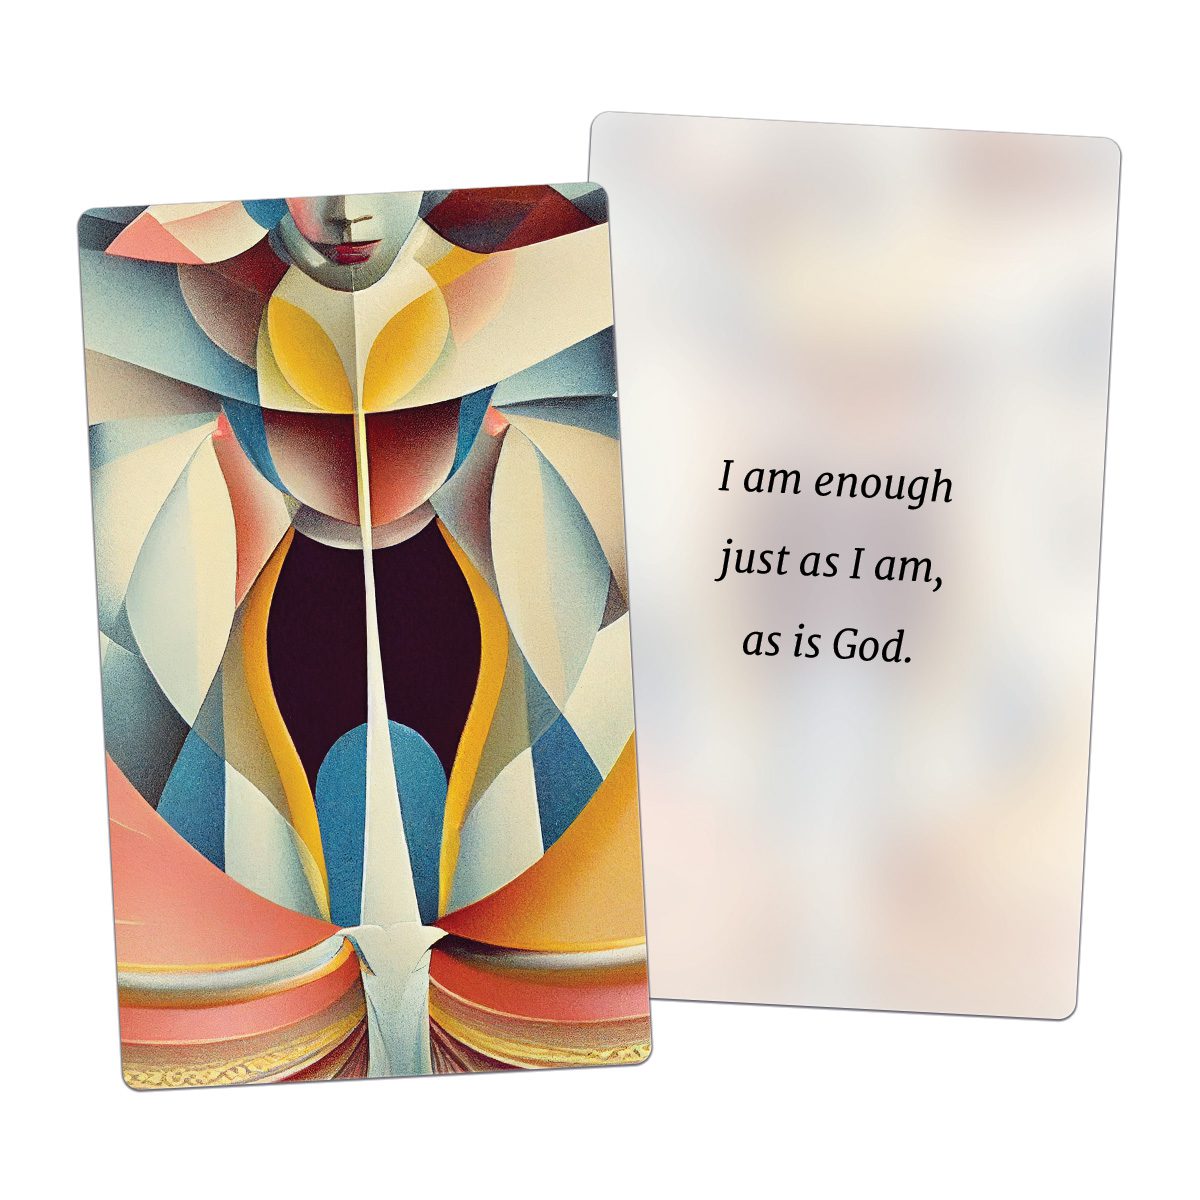 I am enough just as I am, as is God. (AFFIRMATION CARD)